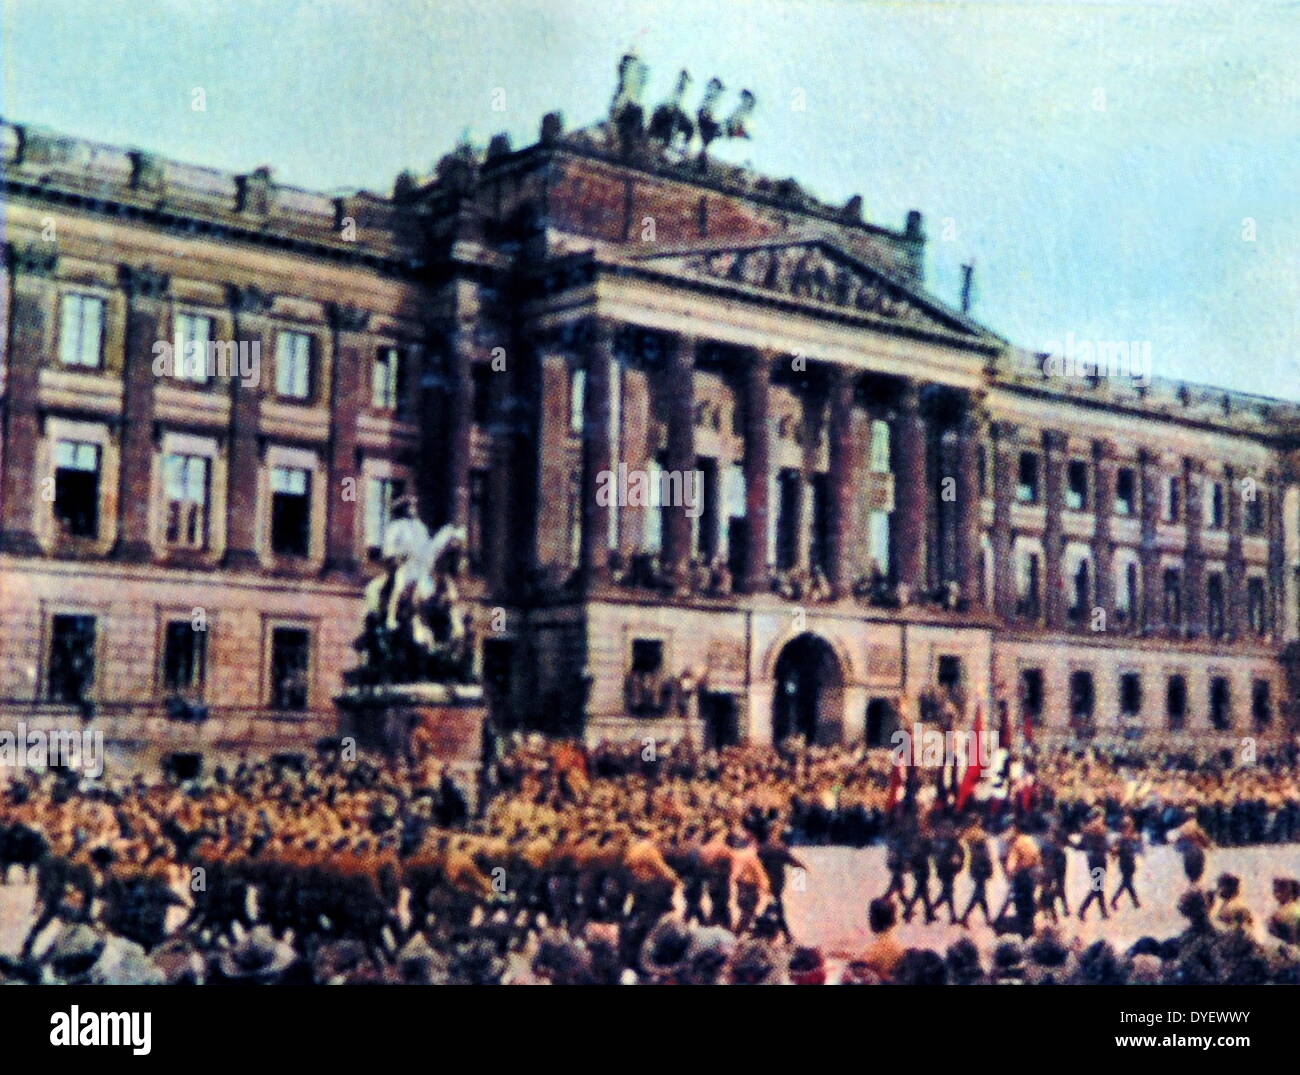 nazis parade in front of the Palace in Brunswick, Germany circa 1933 Stock Photo